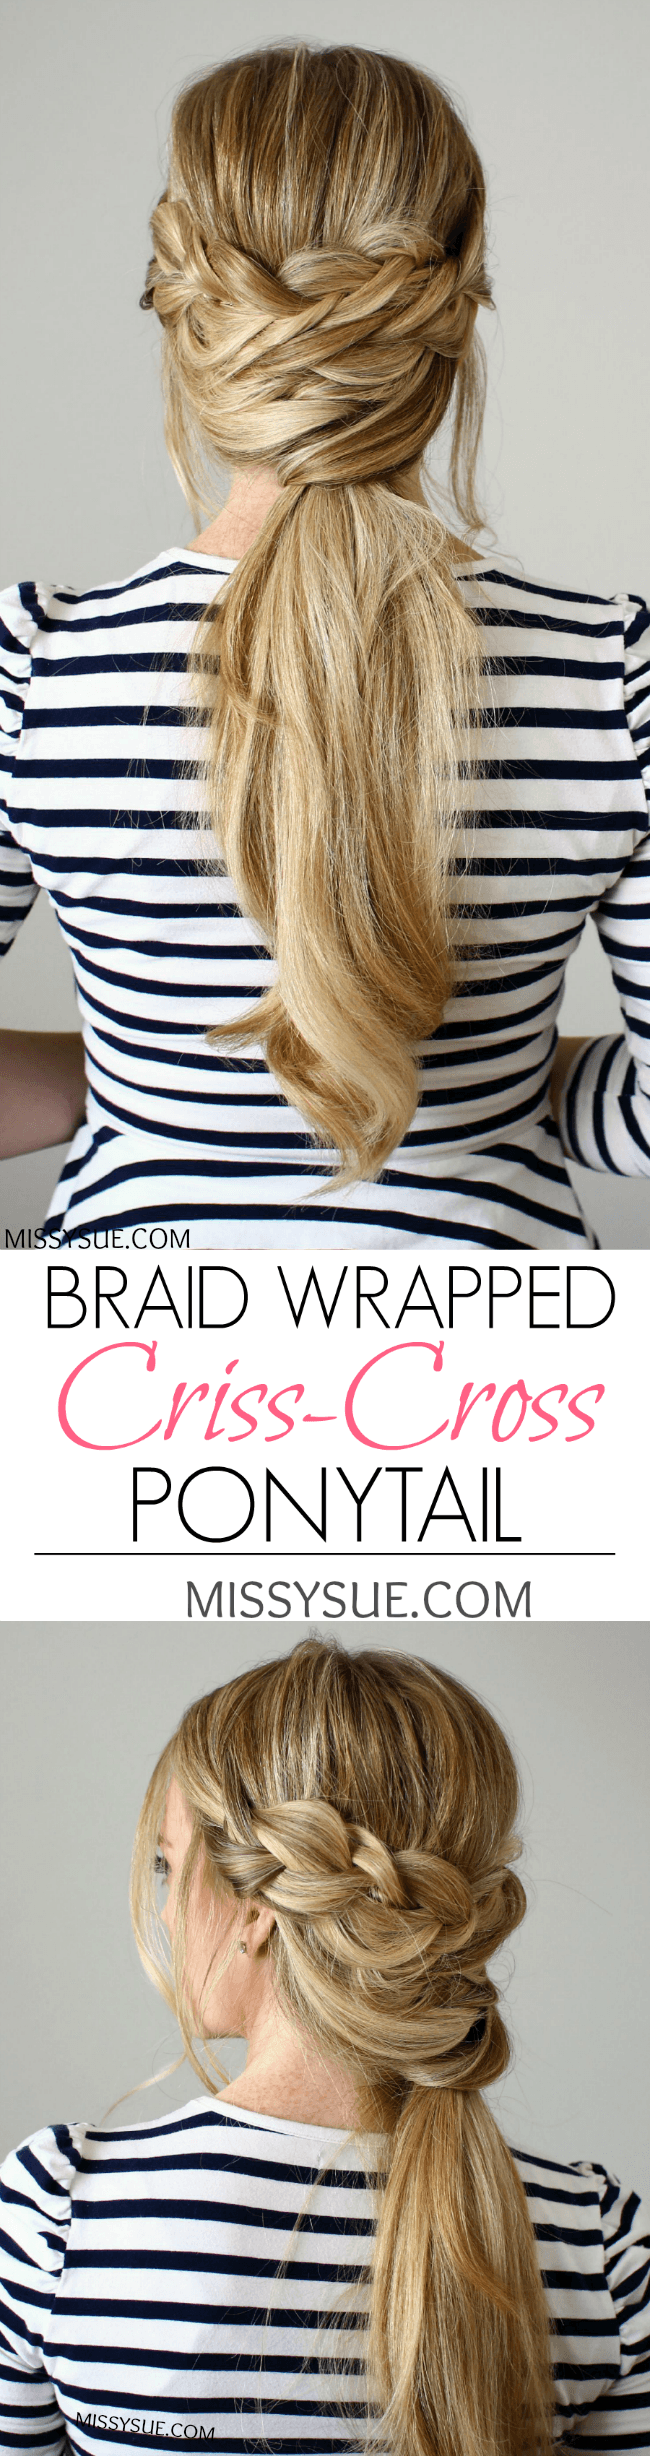 Braid Wrapped Criss-Cross Ponytail